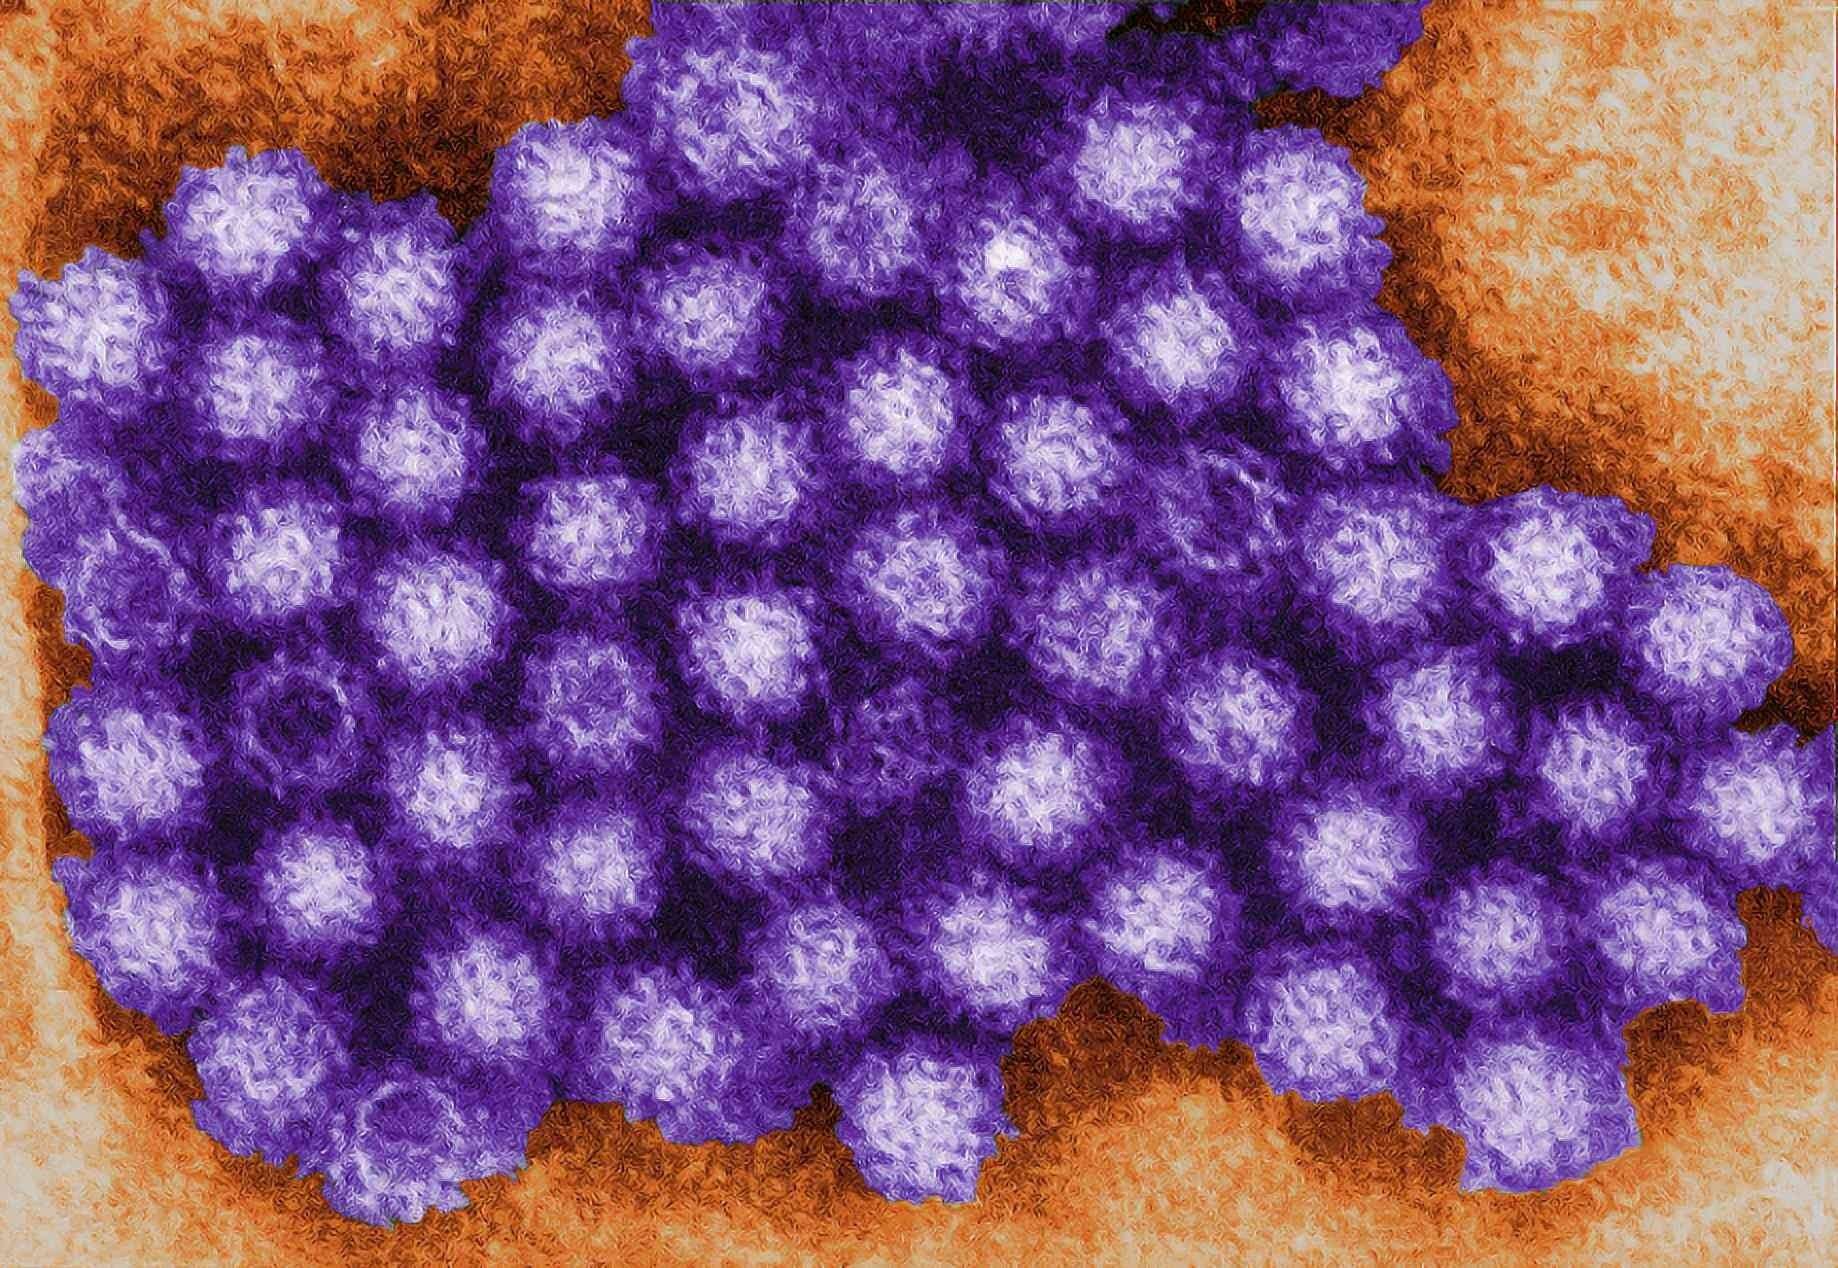 Cases of norovirus are being recorded as highest among people aged 65 and over. Image; Stock photo.